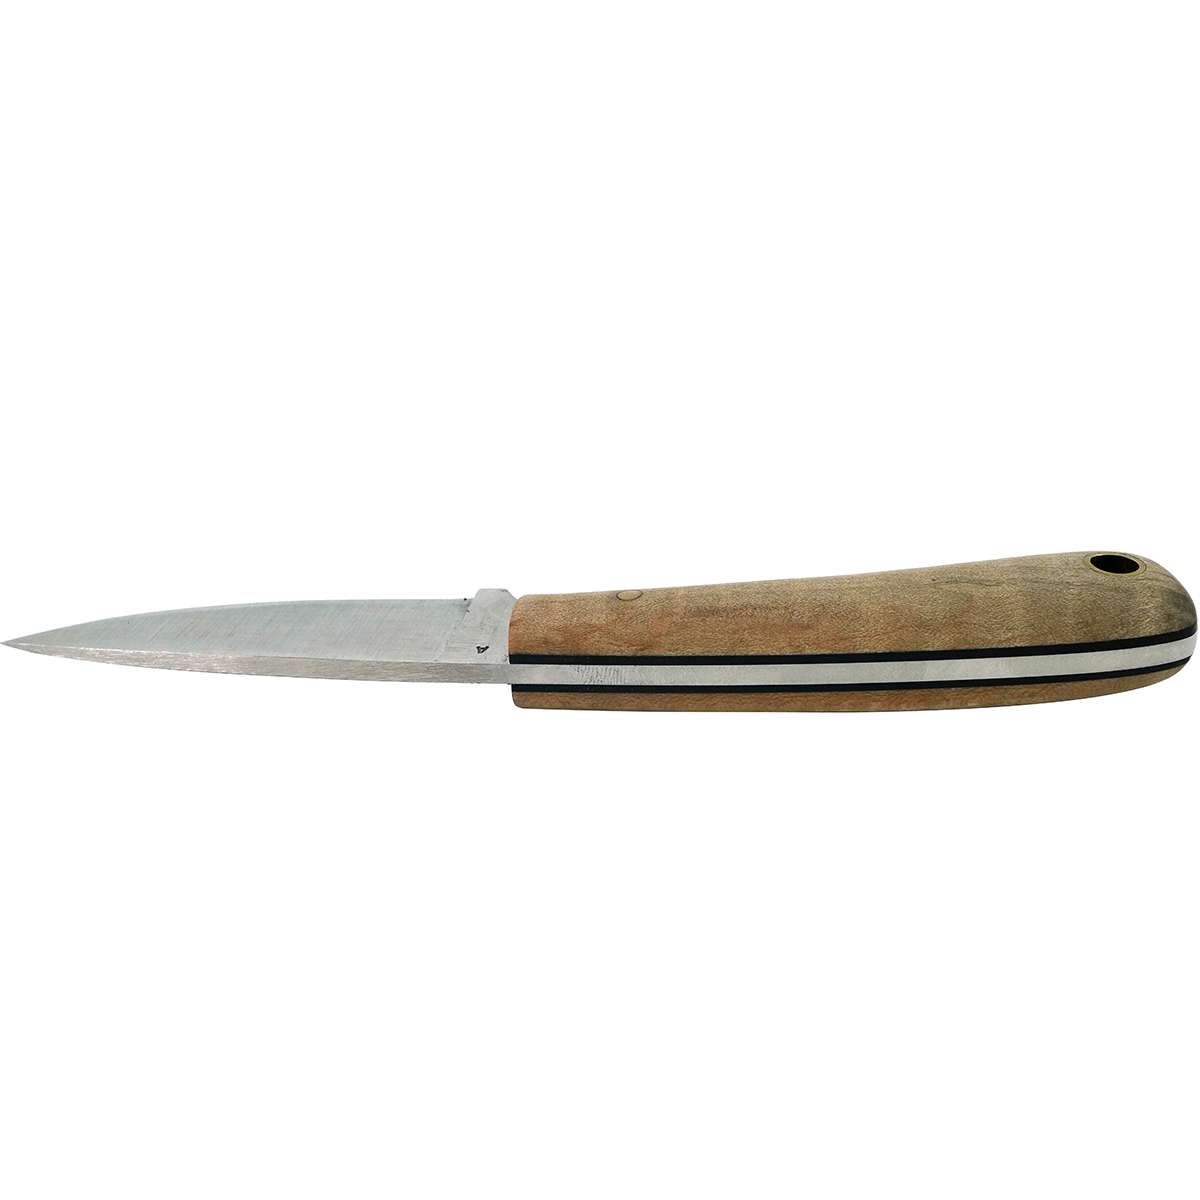 LT Wright Frontier Valley A2 Natural Curly Maple with Black Liner Knife